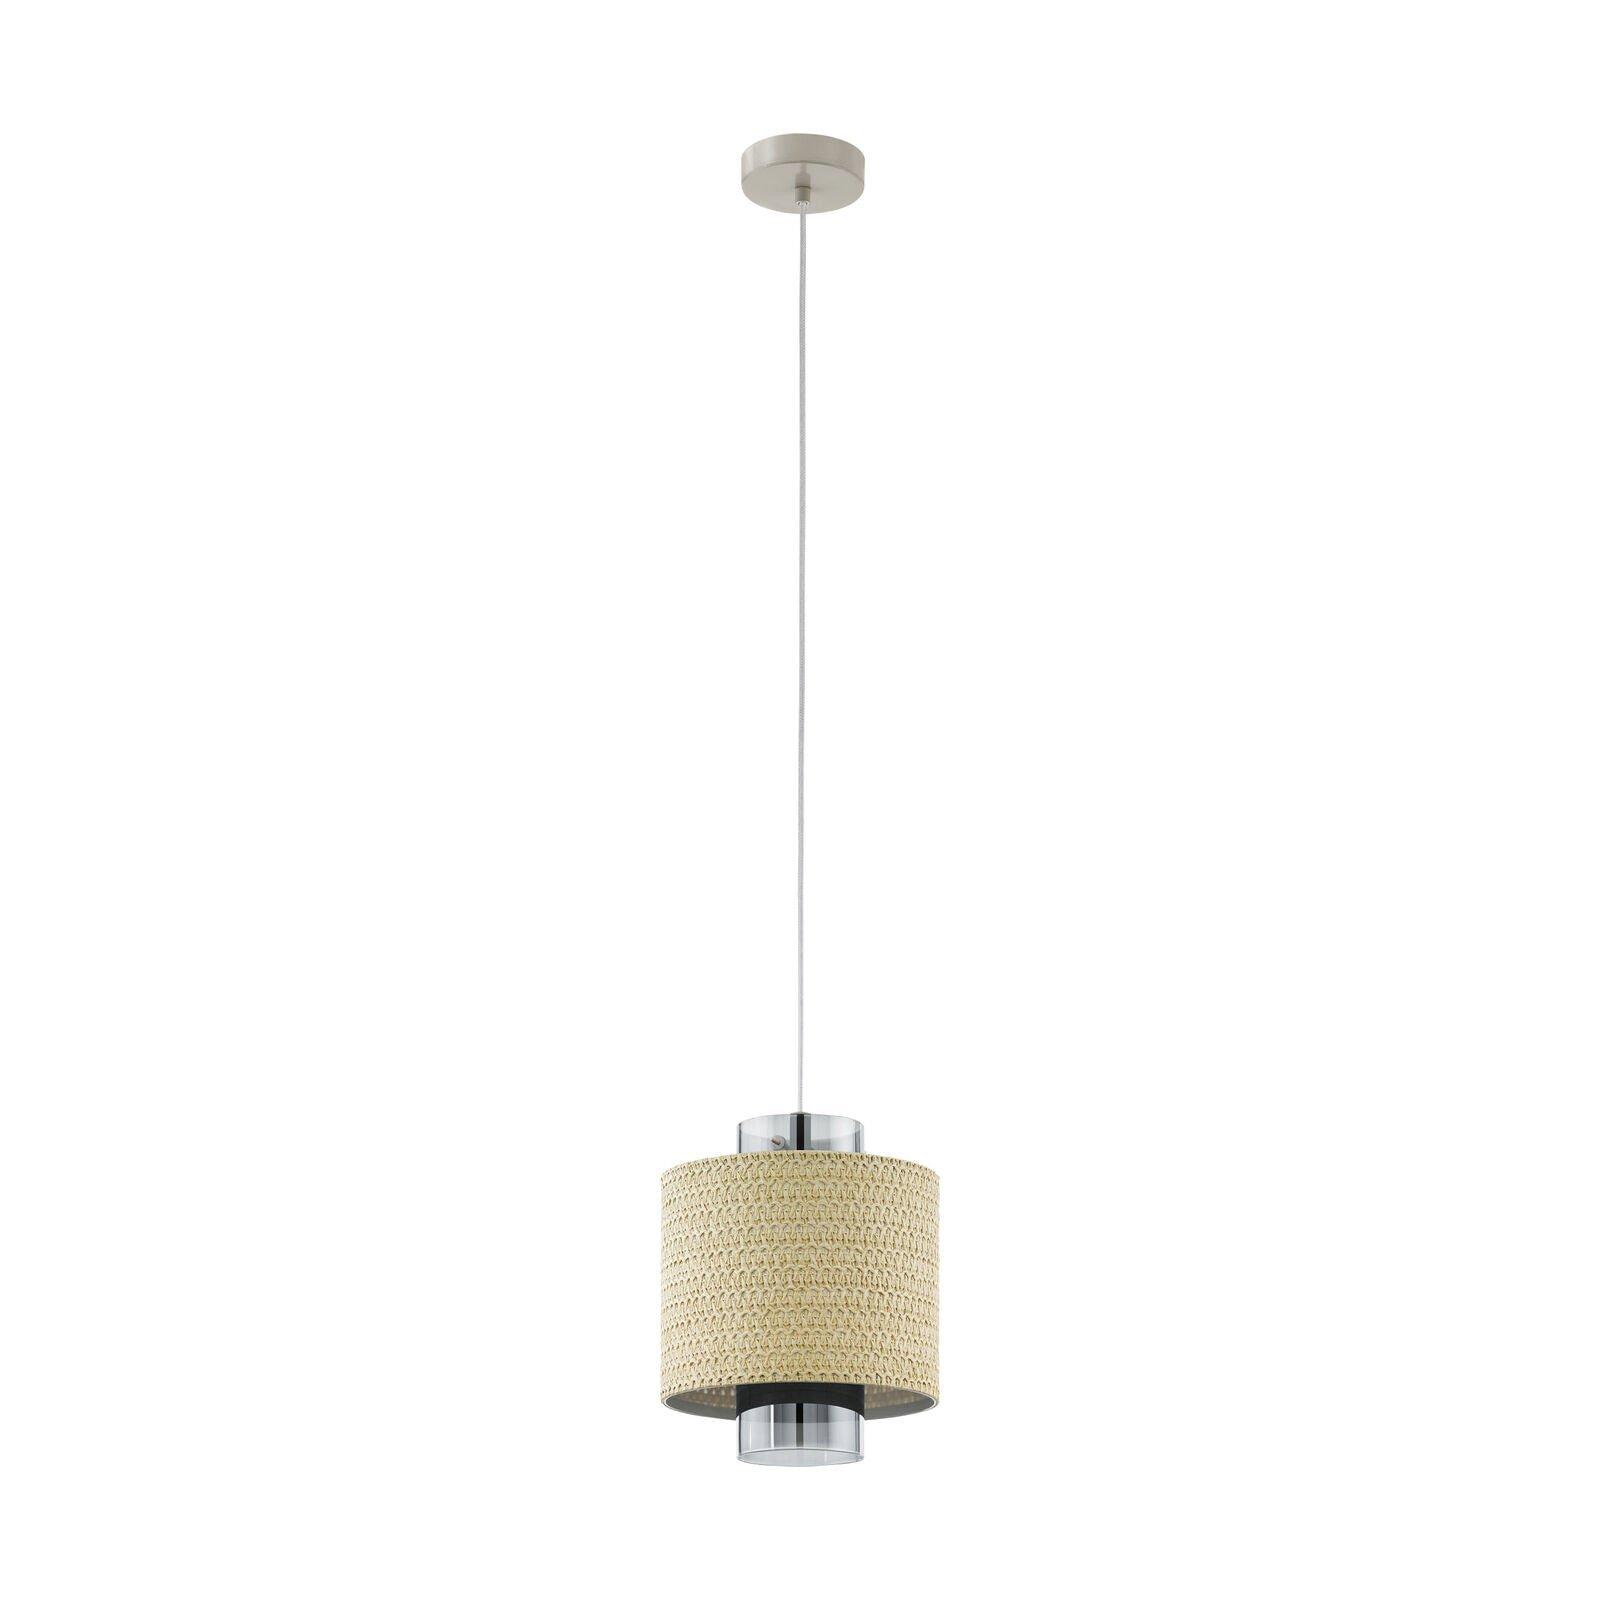 Hanging Ceiling Pendant Light Seagrass Shade & Glass E27 Hallway Feature Lamp